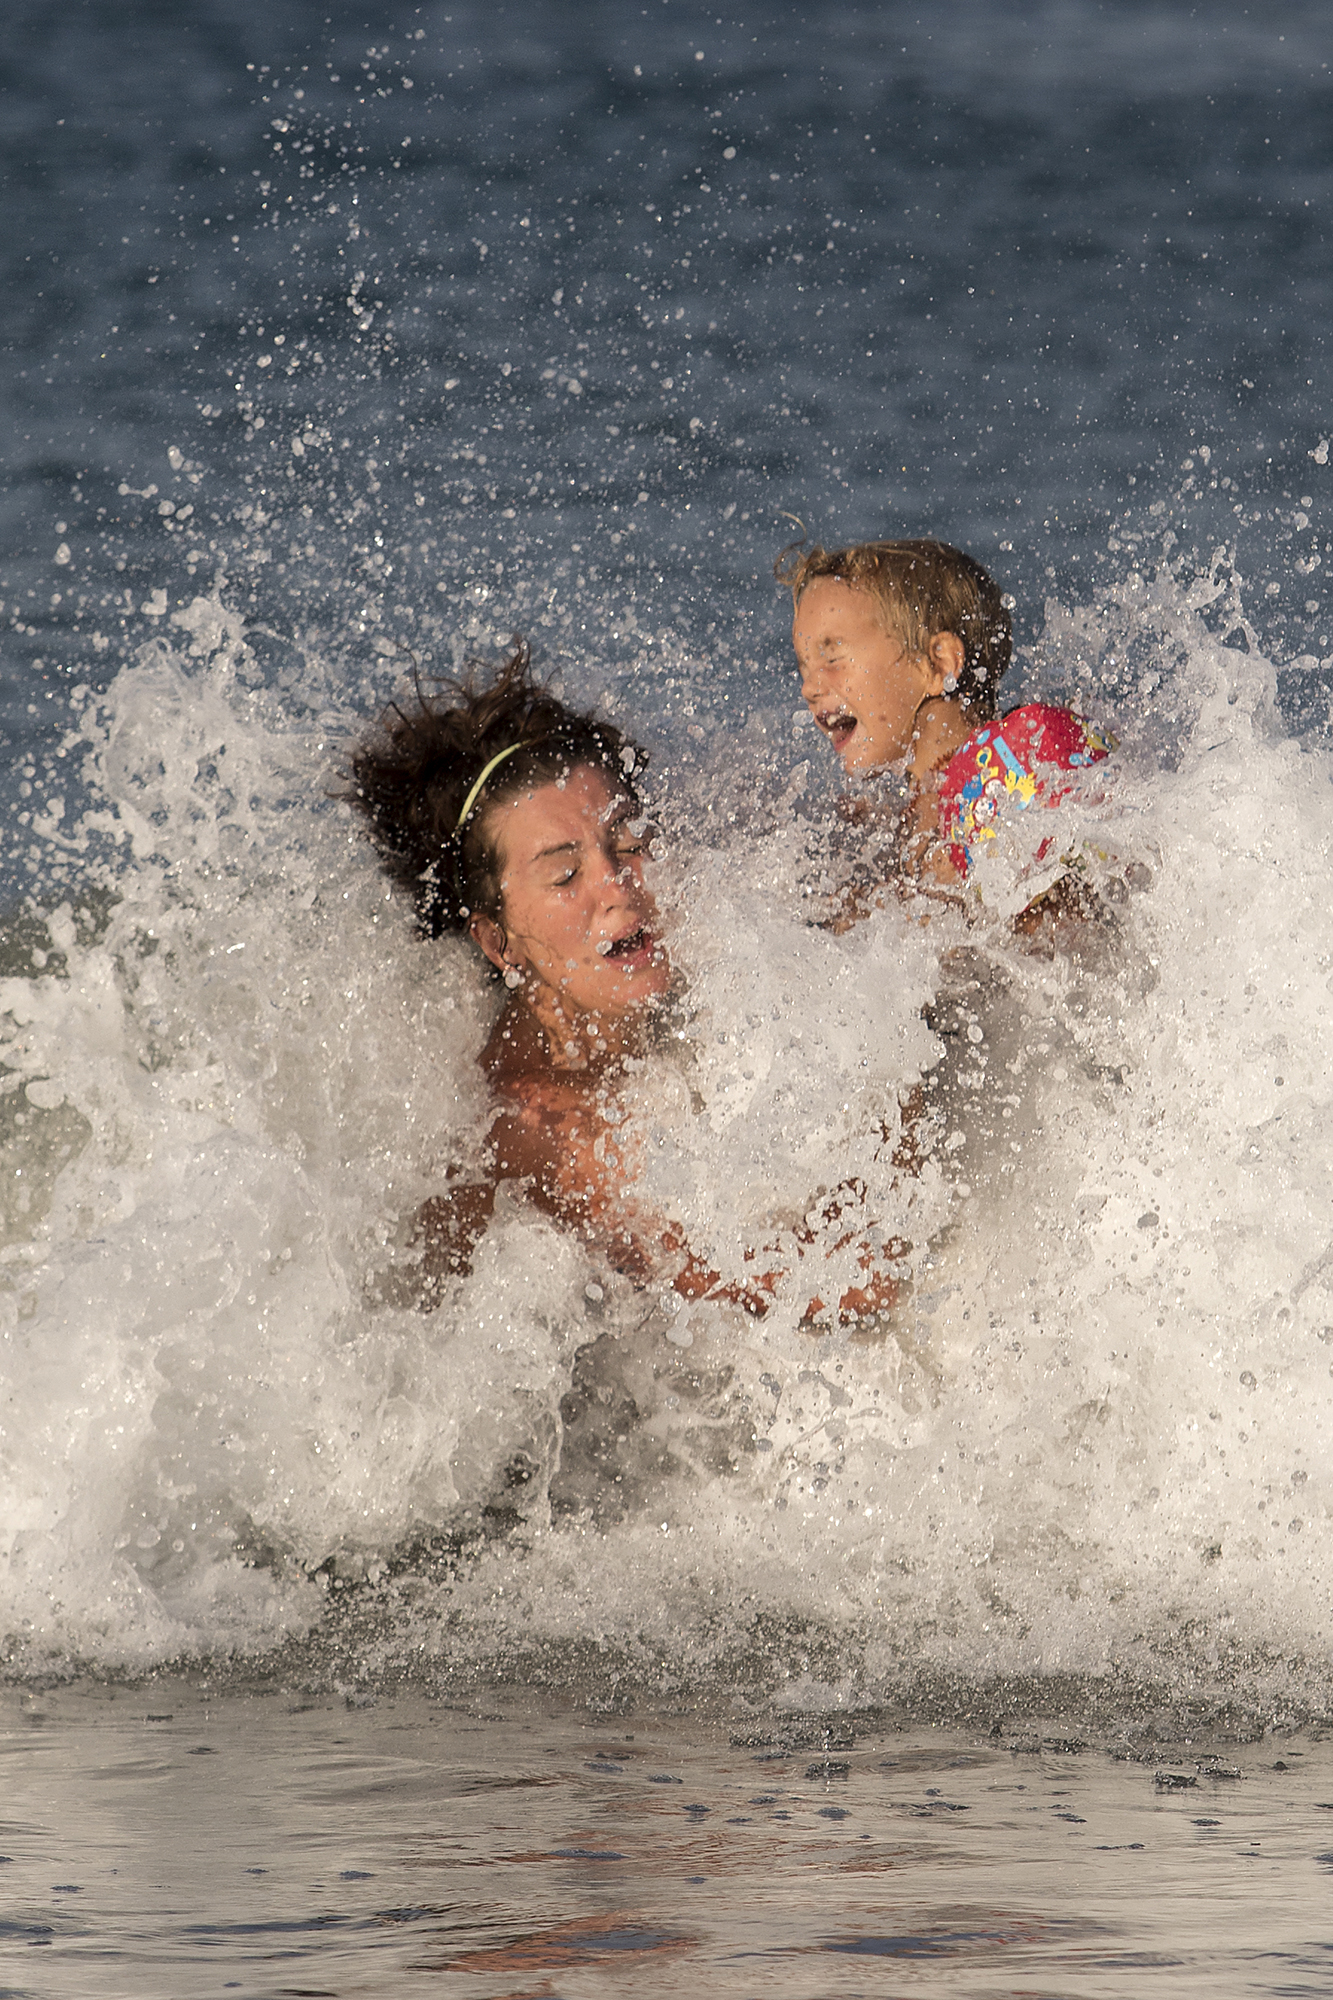 Being rocked by the waves...